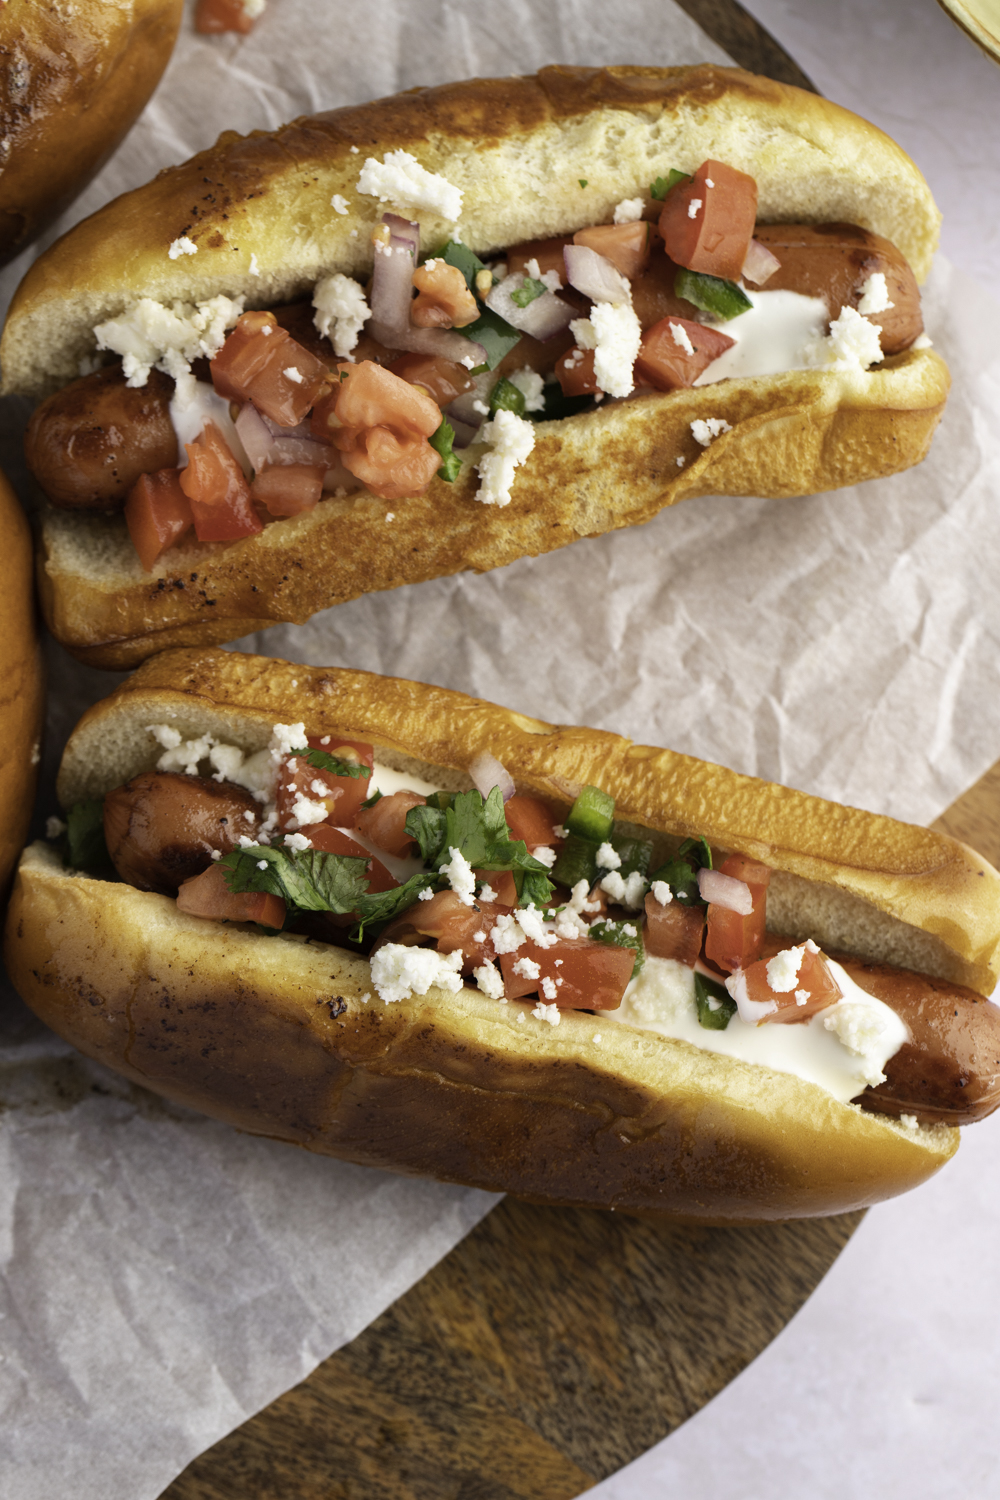 Mexican Hot Dogs (Easy Recipe) - Insanely Good